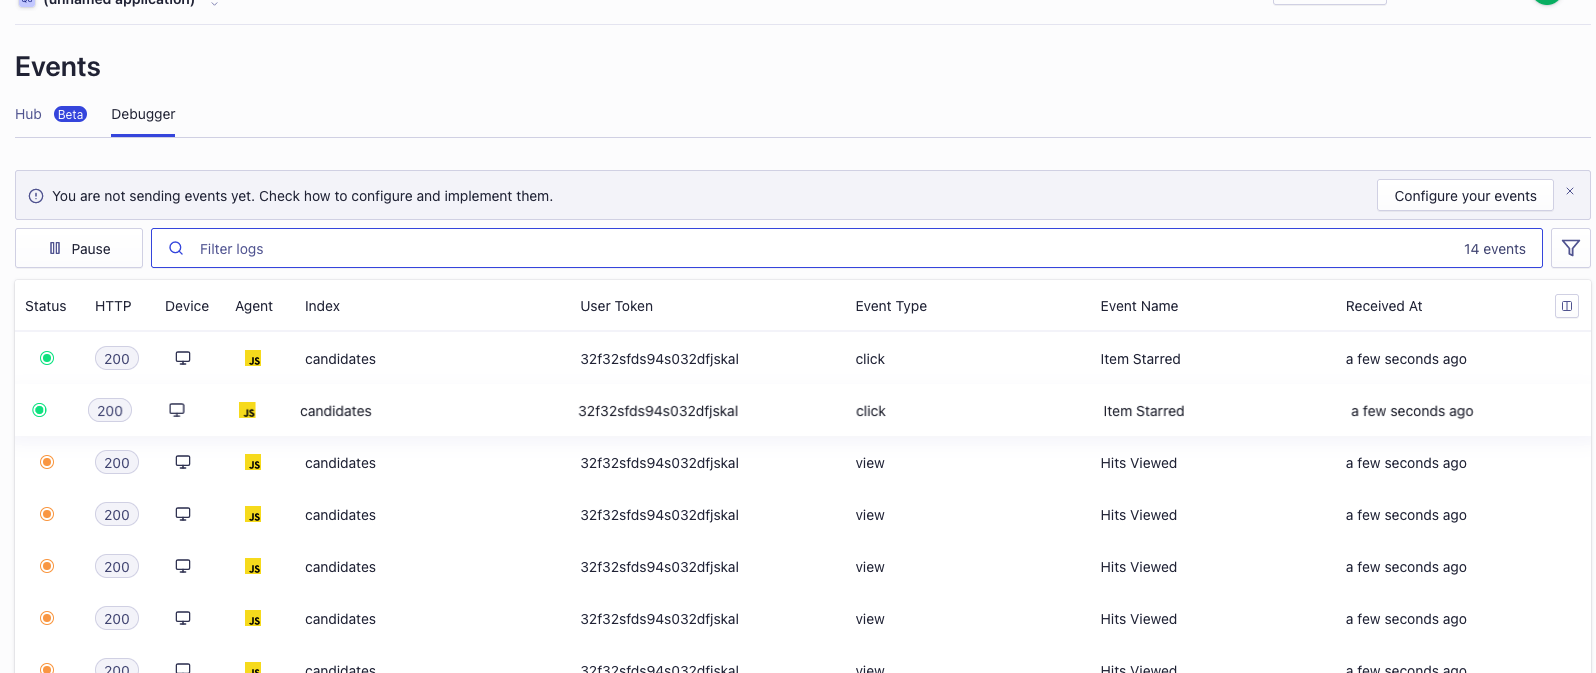 Logs demonstrate we are sending back event insights to Algolia